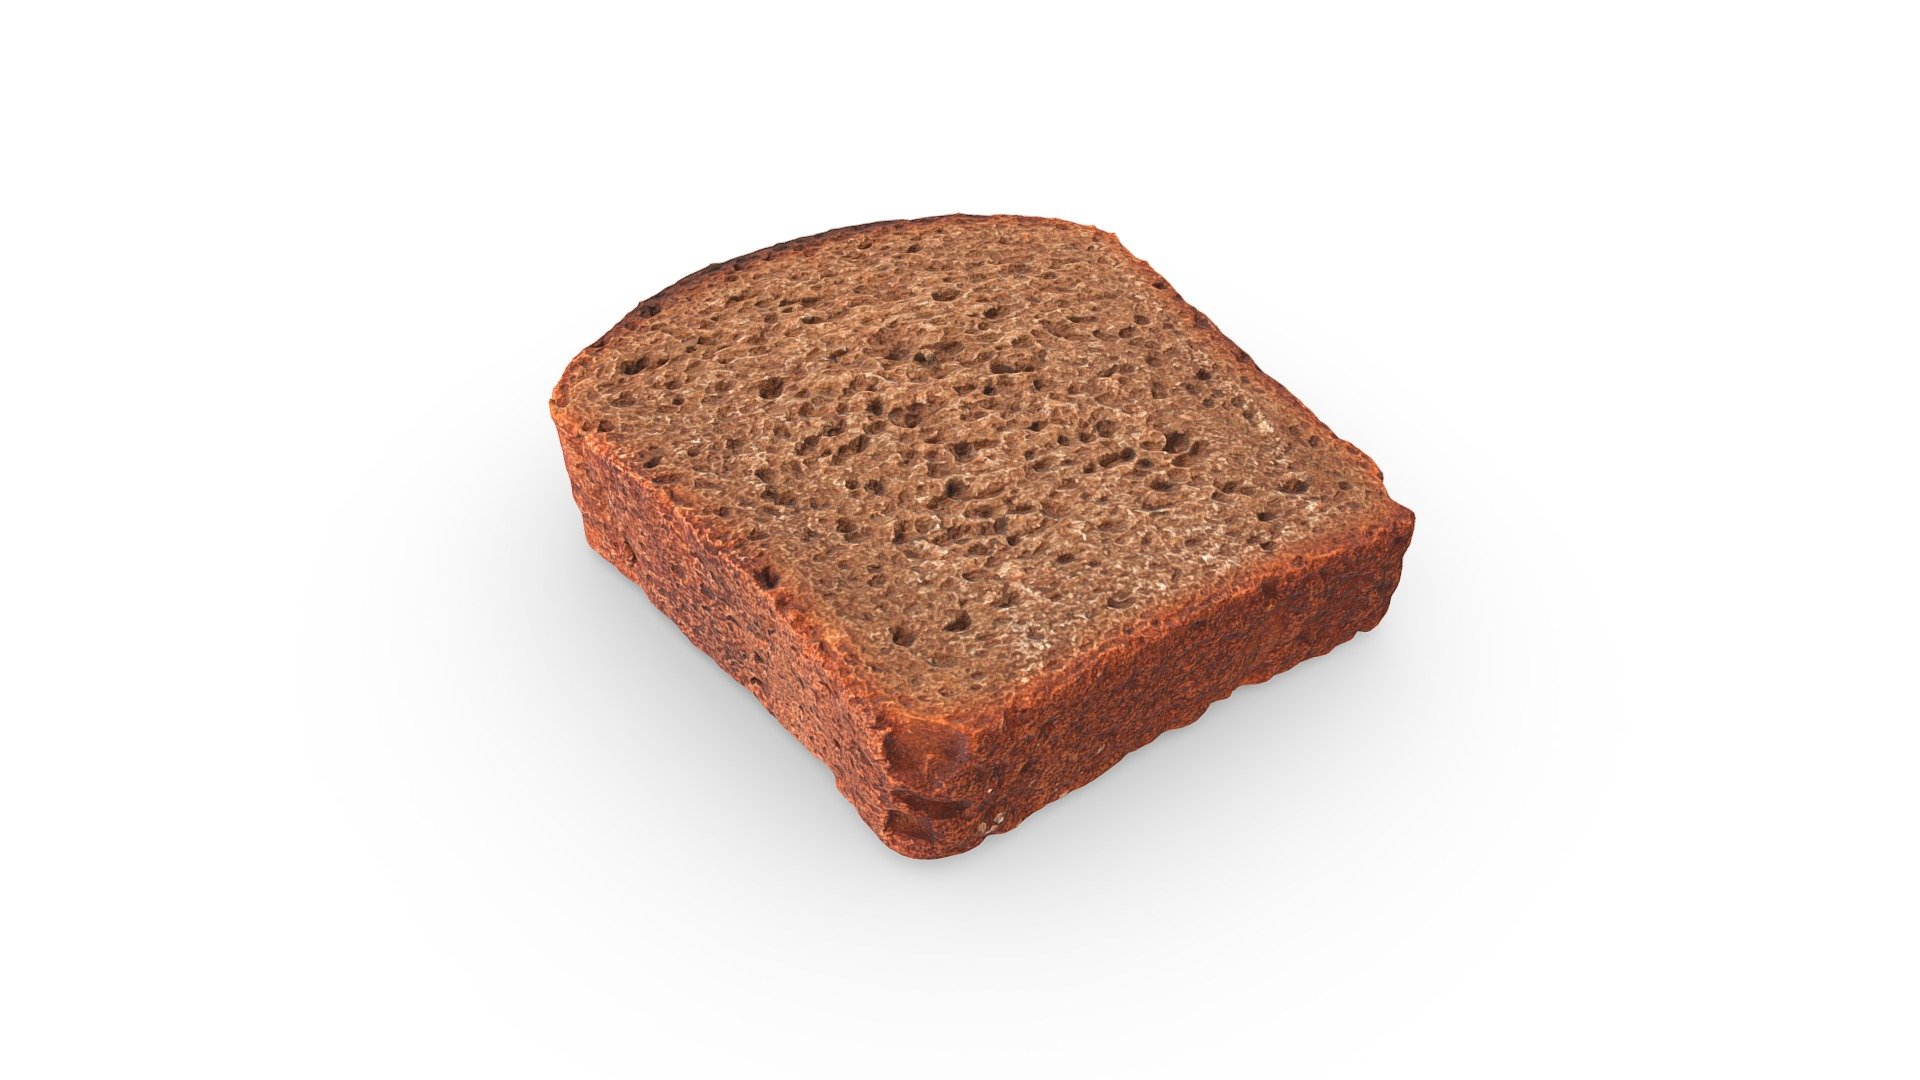 High-poly a slice of rye bread photogrammetry scan. PBR texture maps 4096x4096 px. resolution for metallic or specular workflow. Scan from real food, high-poly 3D model, 4K resolution textures. Additional file contains source PNG texture maps.

Additional texture maps: AmbientOcclusion, BaseColor, Diffuse, Glossiness, Height, Metallic, MetallicSmoothness, Normal, Roughness, Specular, SpecularLevel, SpecularSmoothness 3d model